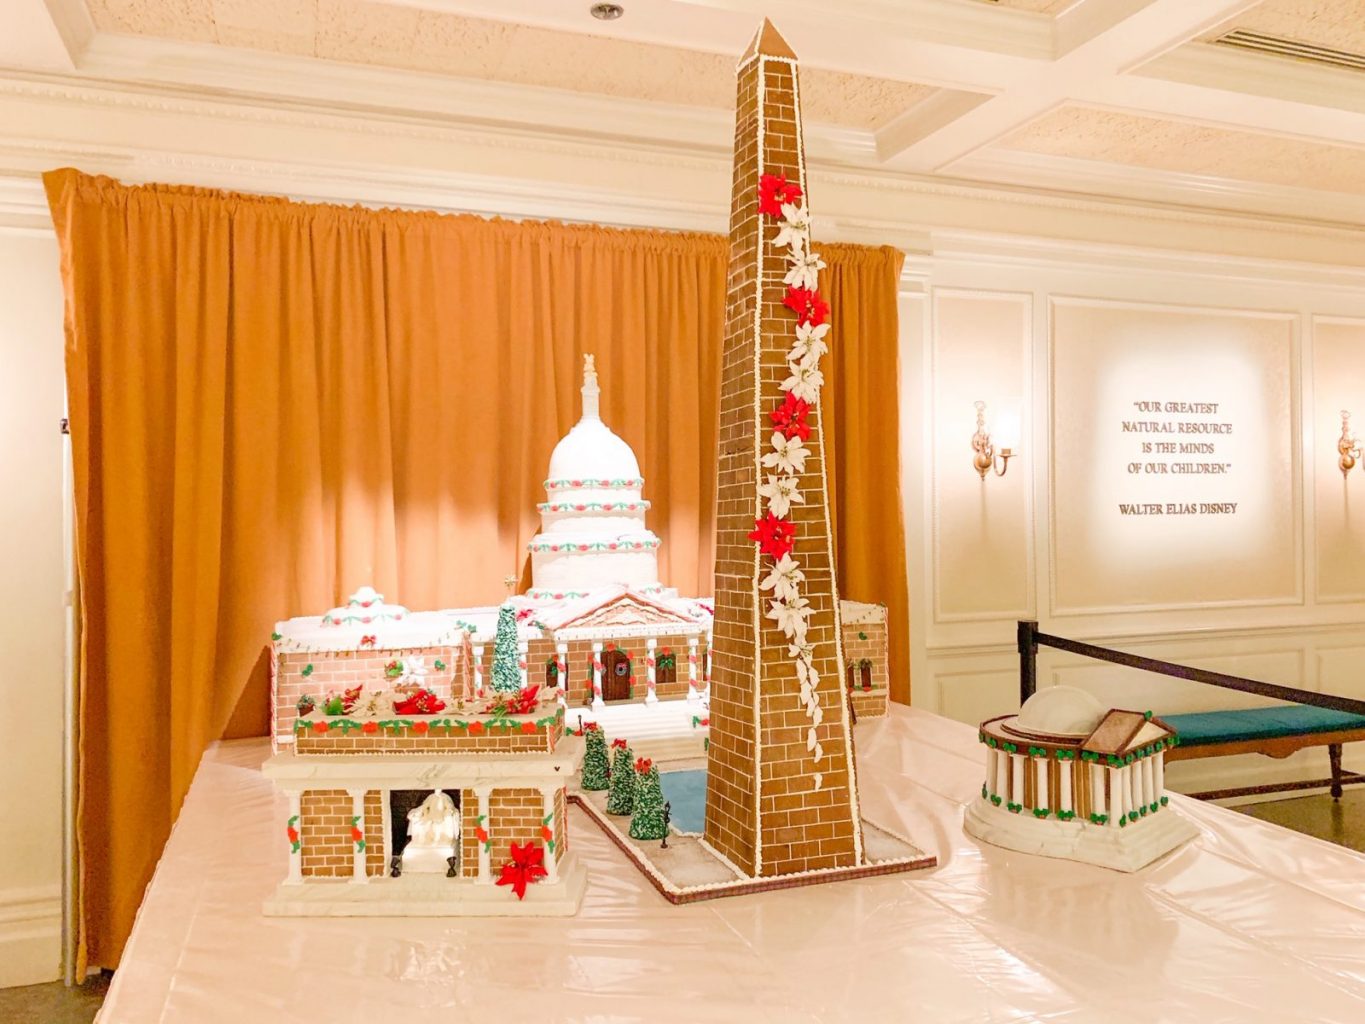 the mall from Washington D.C. made into a smaller scale gingerbread houses